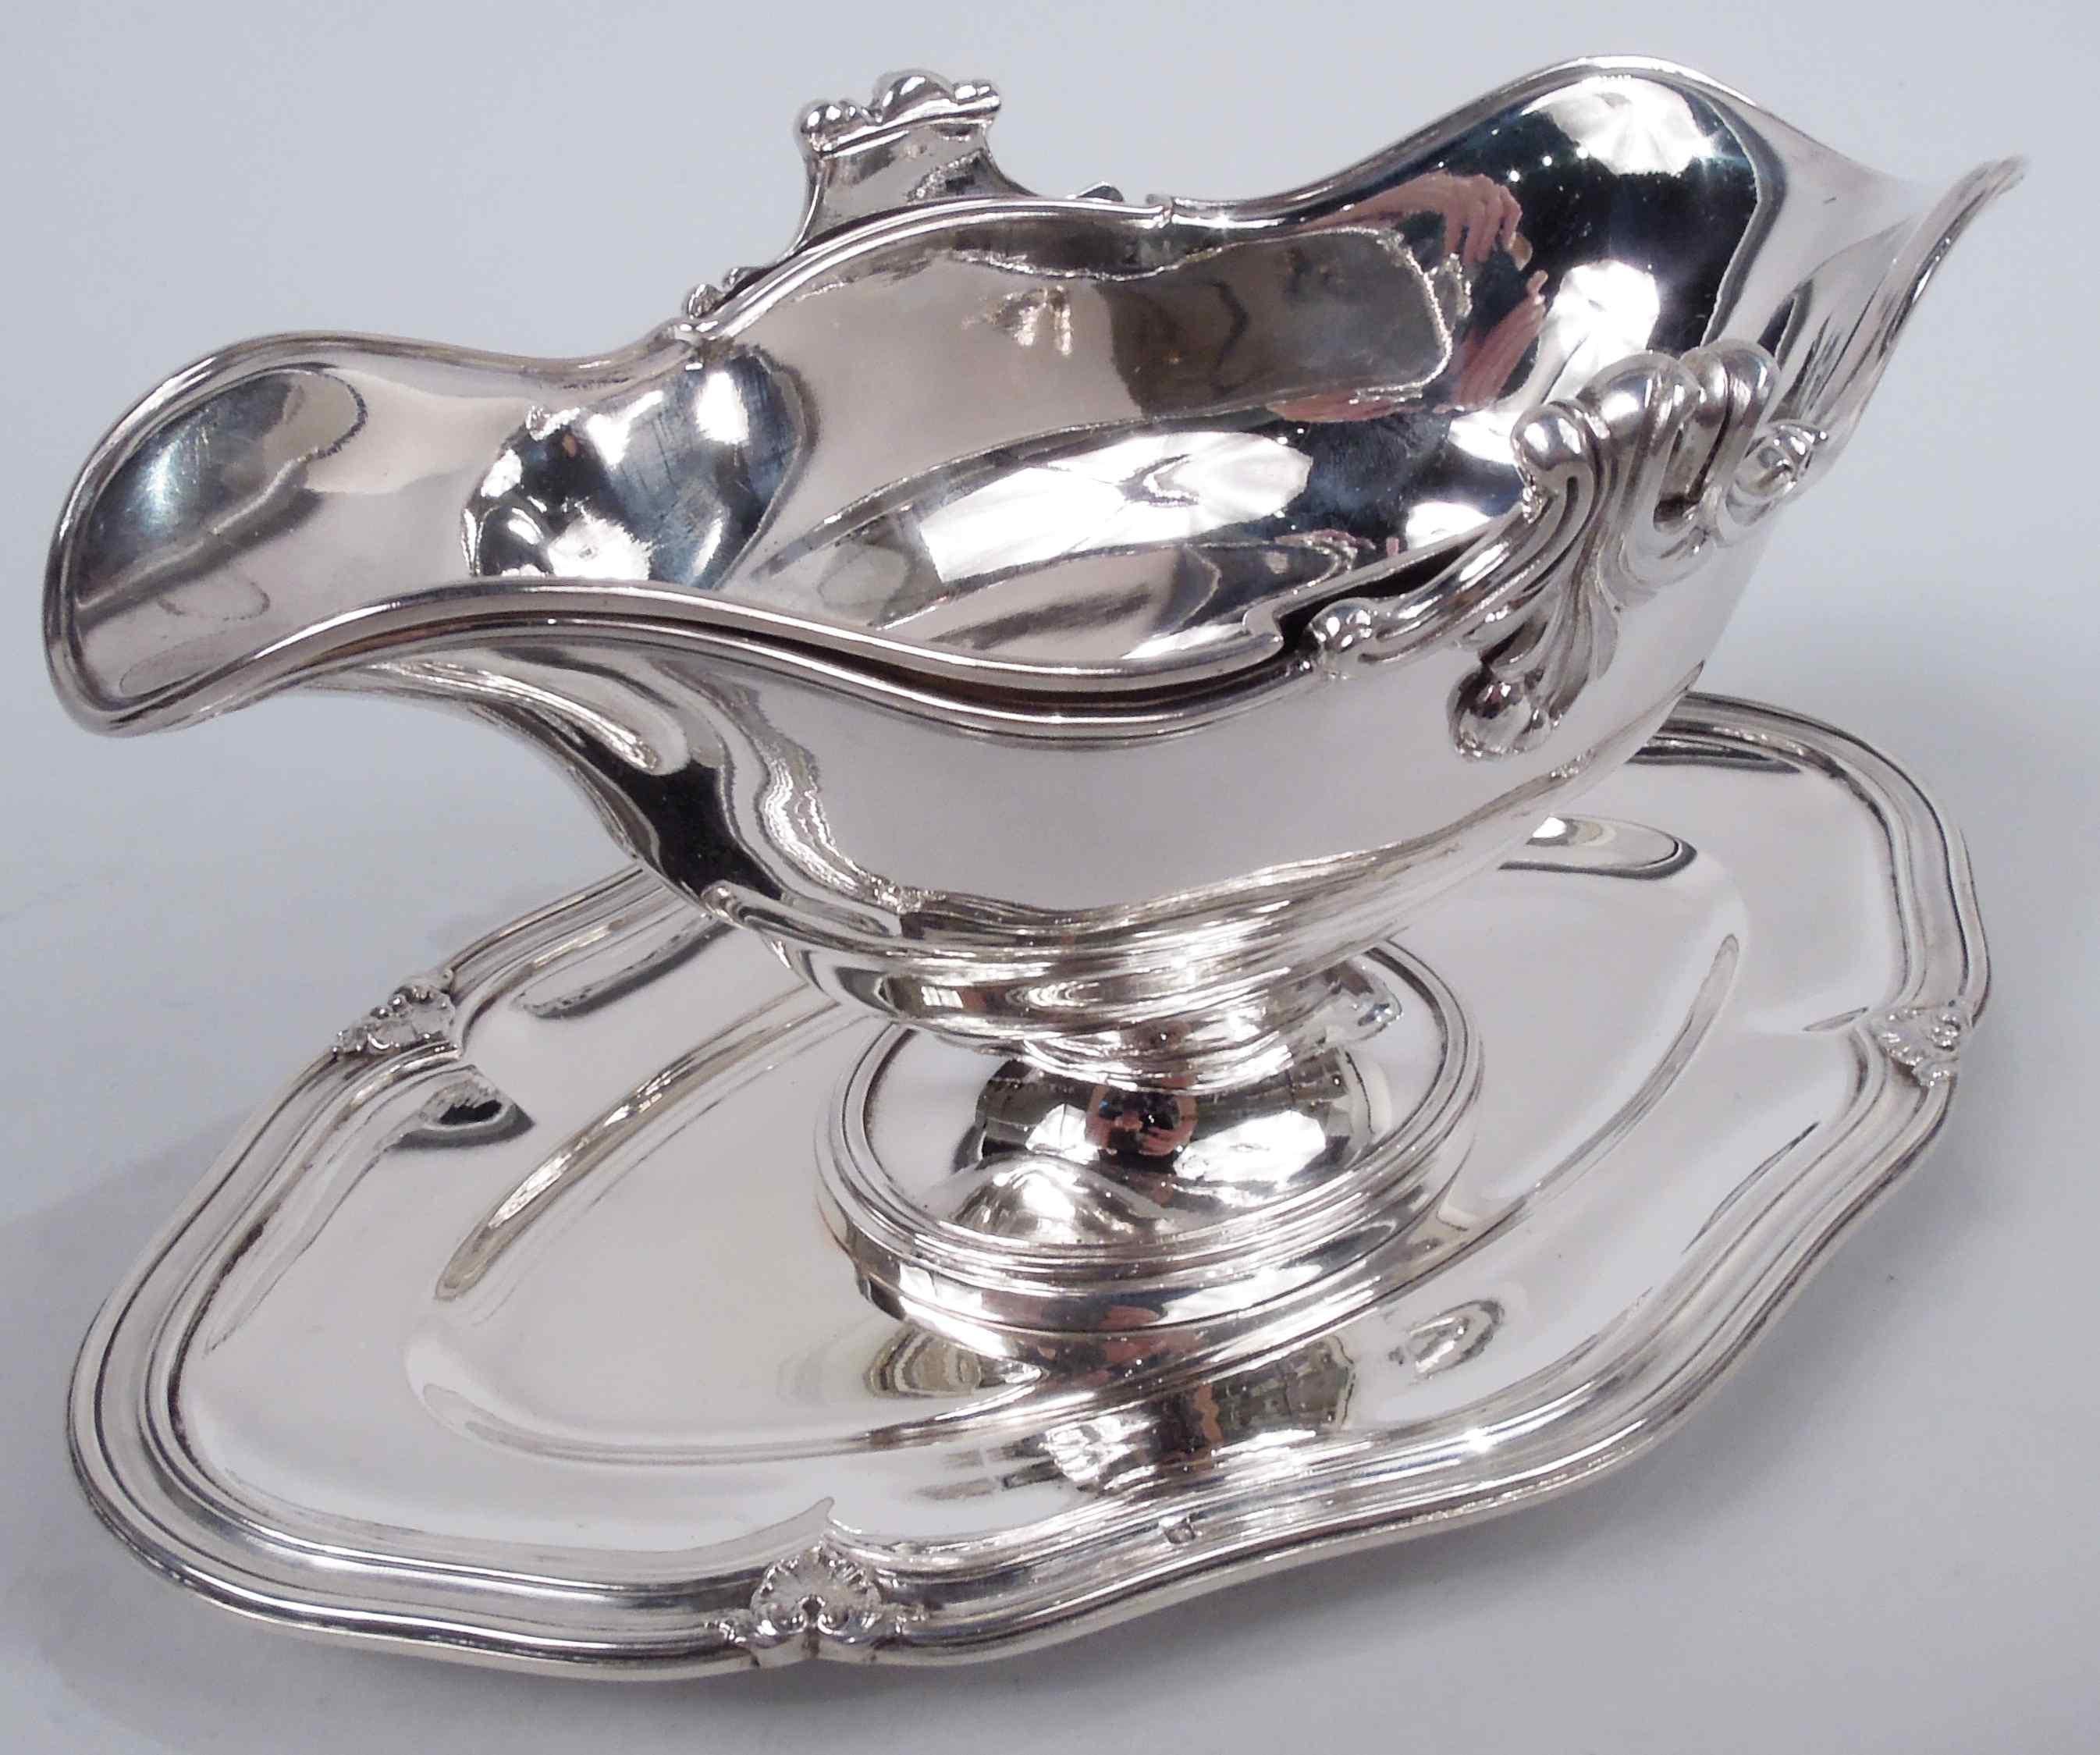 Pair of Belle Epoque Classical 950 silver gravy boats. Made by Odiot in France, ca 1900. Each: Ovoid with u-form end spouts and raised oval foot mounted to Oval shaped stand. Molded rims. Bowl sides have applied cast leafing scrollwork and stand rim